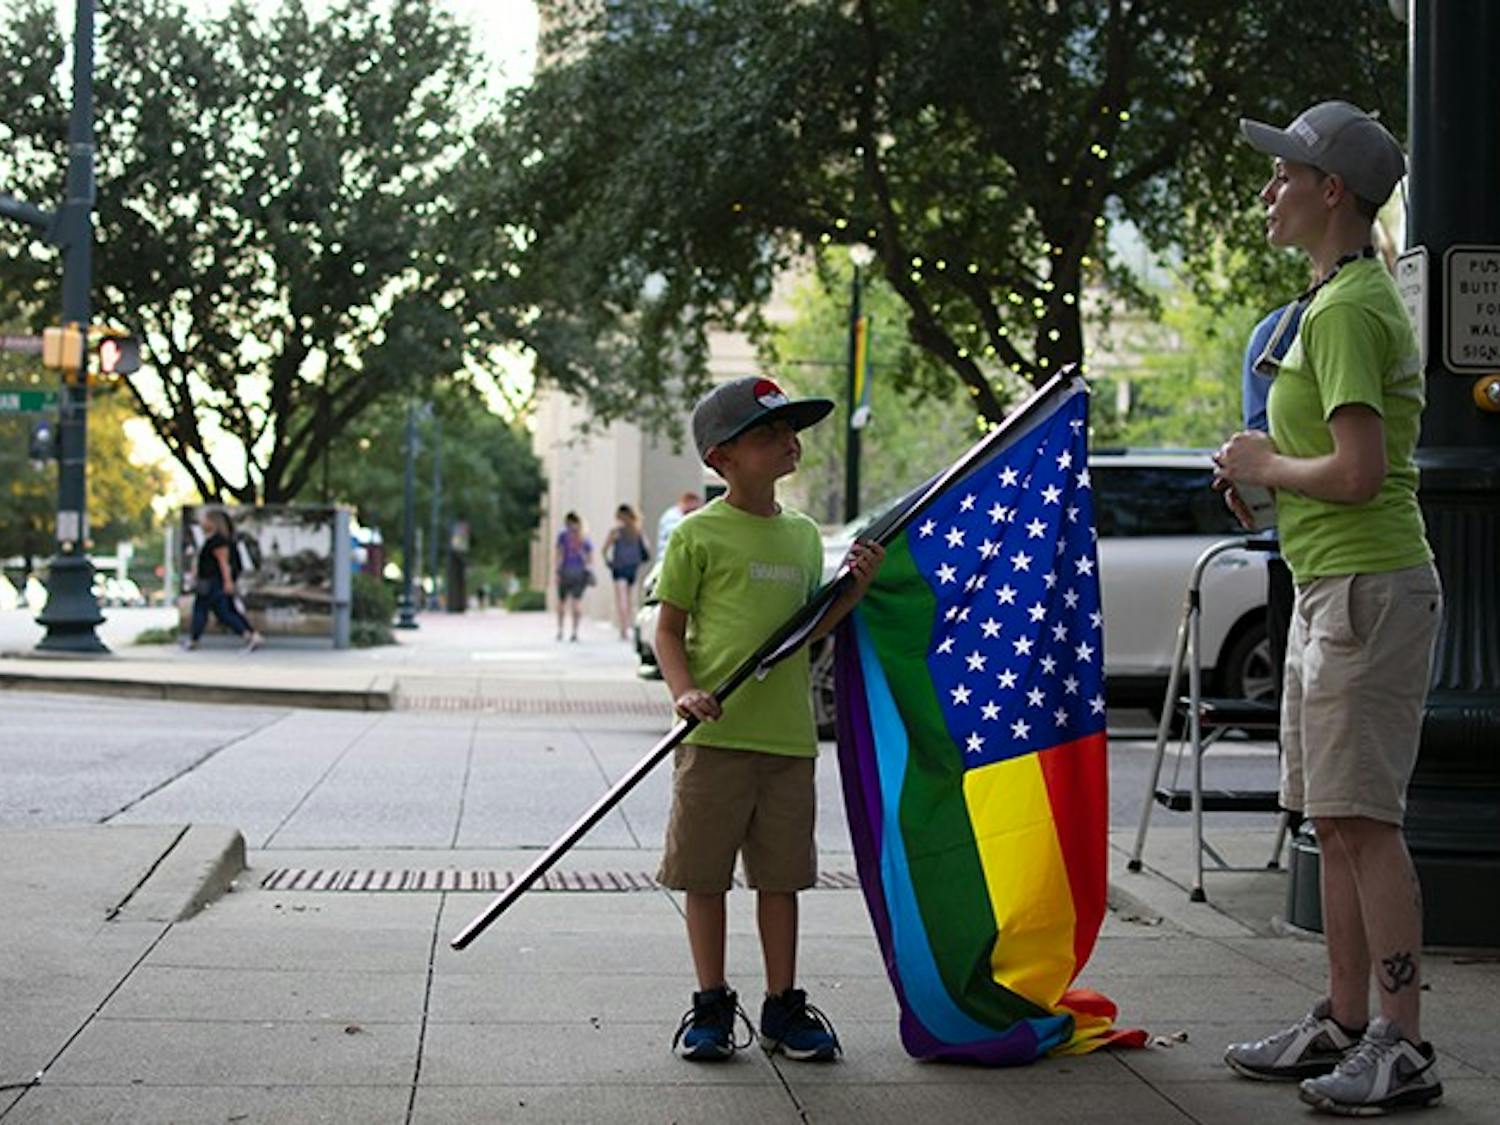 Attendees get ready for the start of the South Carolina pride parade on Friday, Oct. 4th.&nbsp;